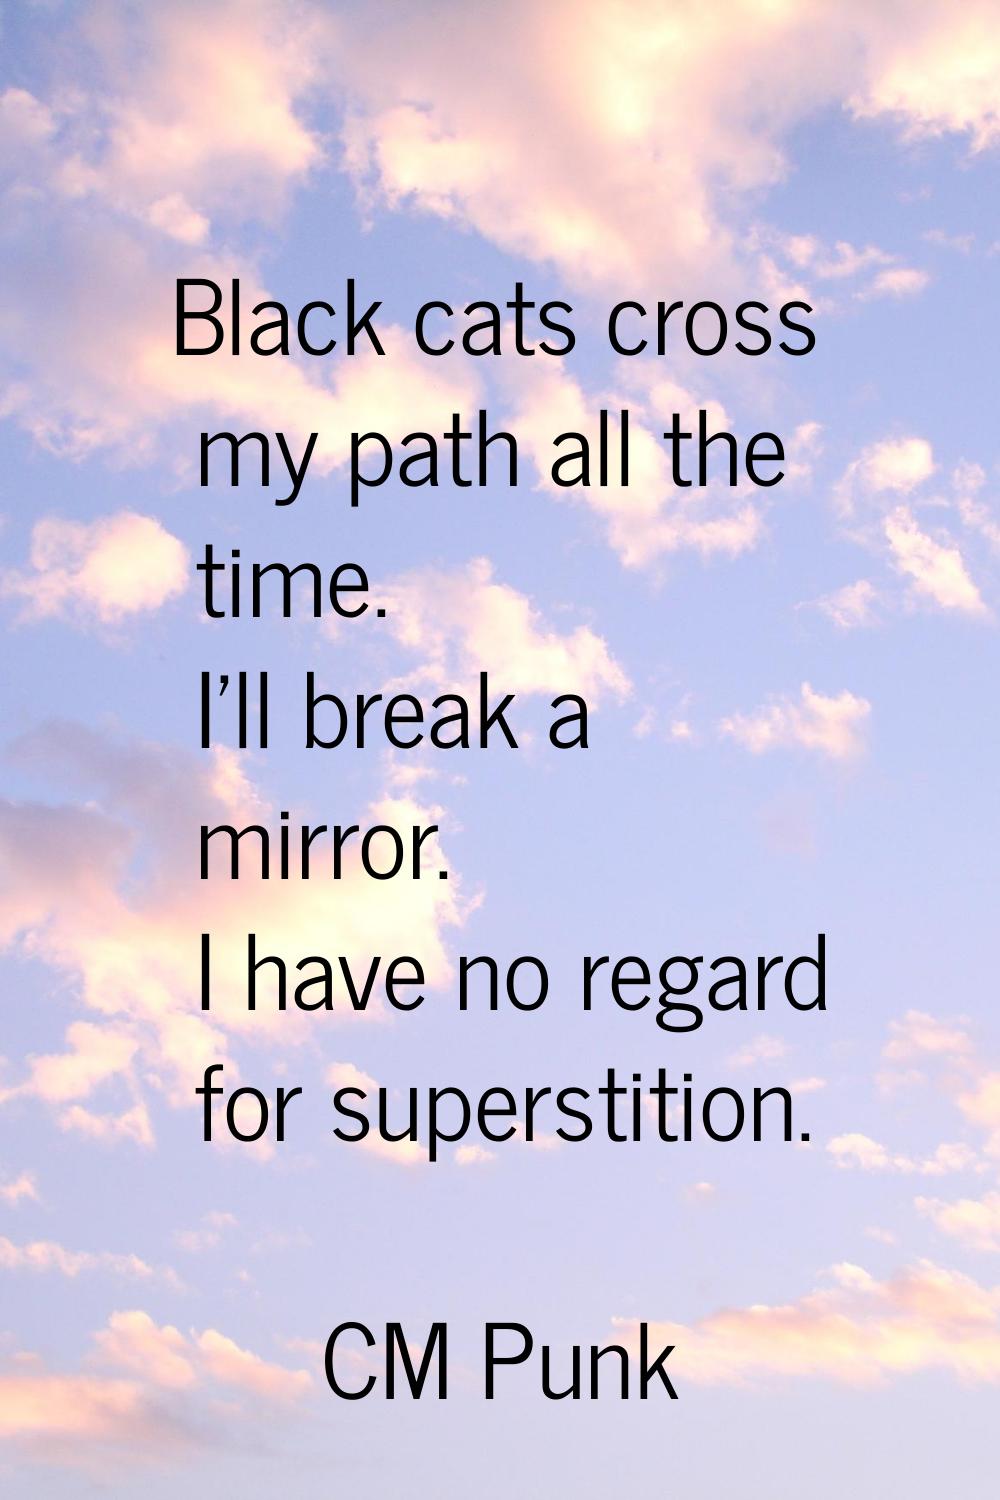 Black cats cross my path all the time. I'll break a mirror. I have no regard for superstition.